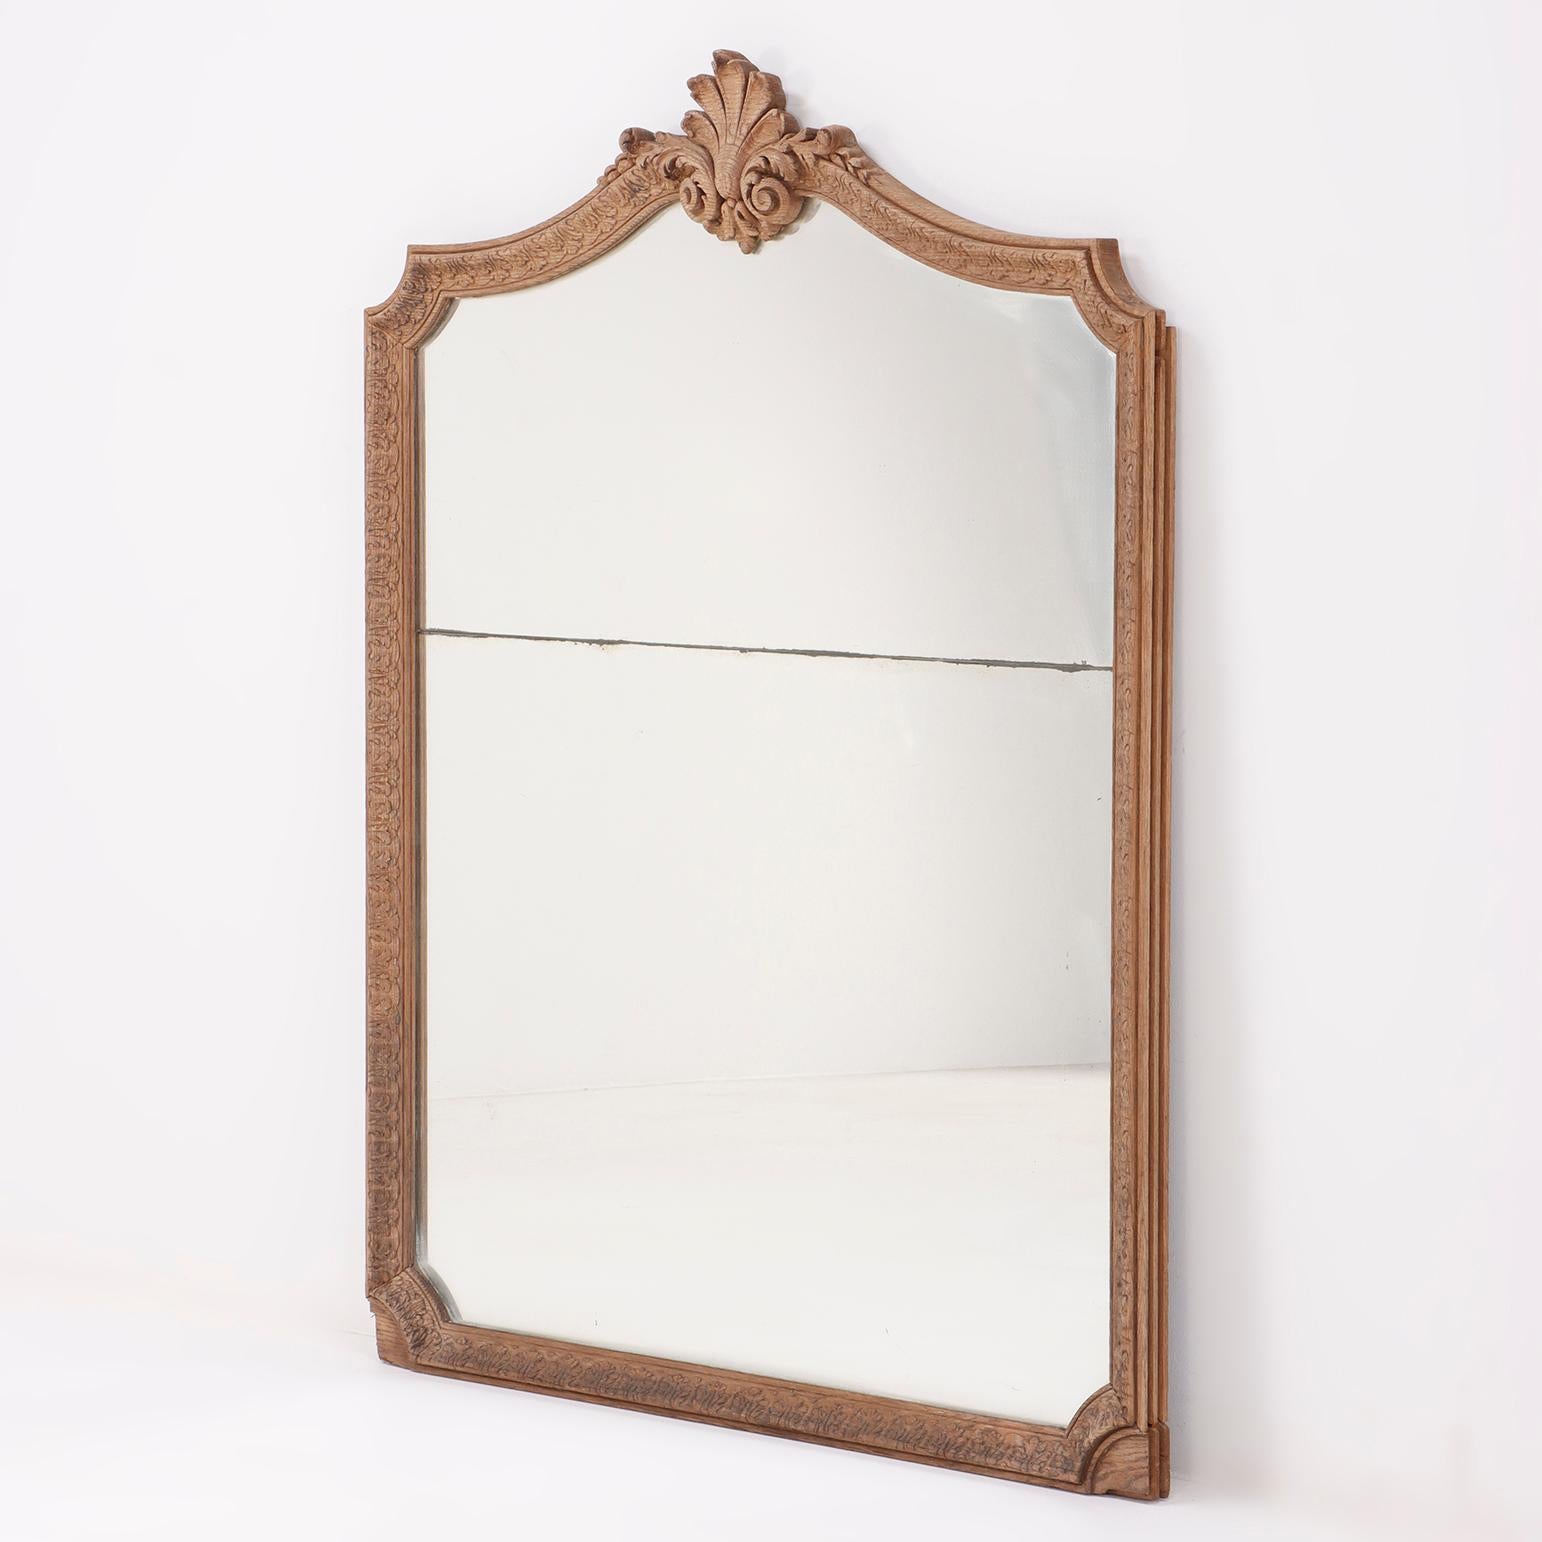 French carved oak mirror C 1800 having two plates of glass. This mirror appears to have been a part of a paneled room based on the design of the sides.